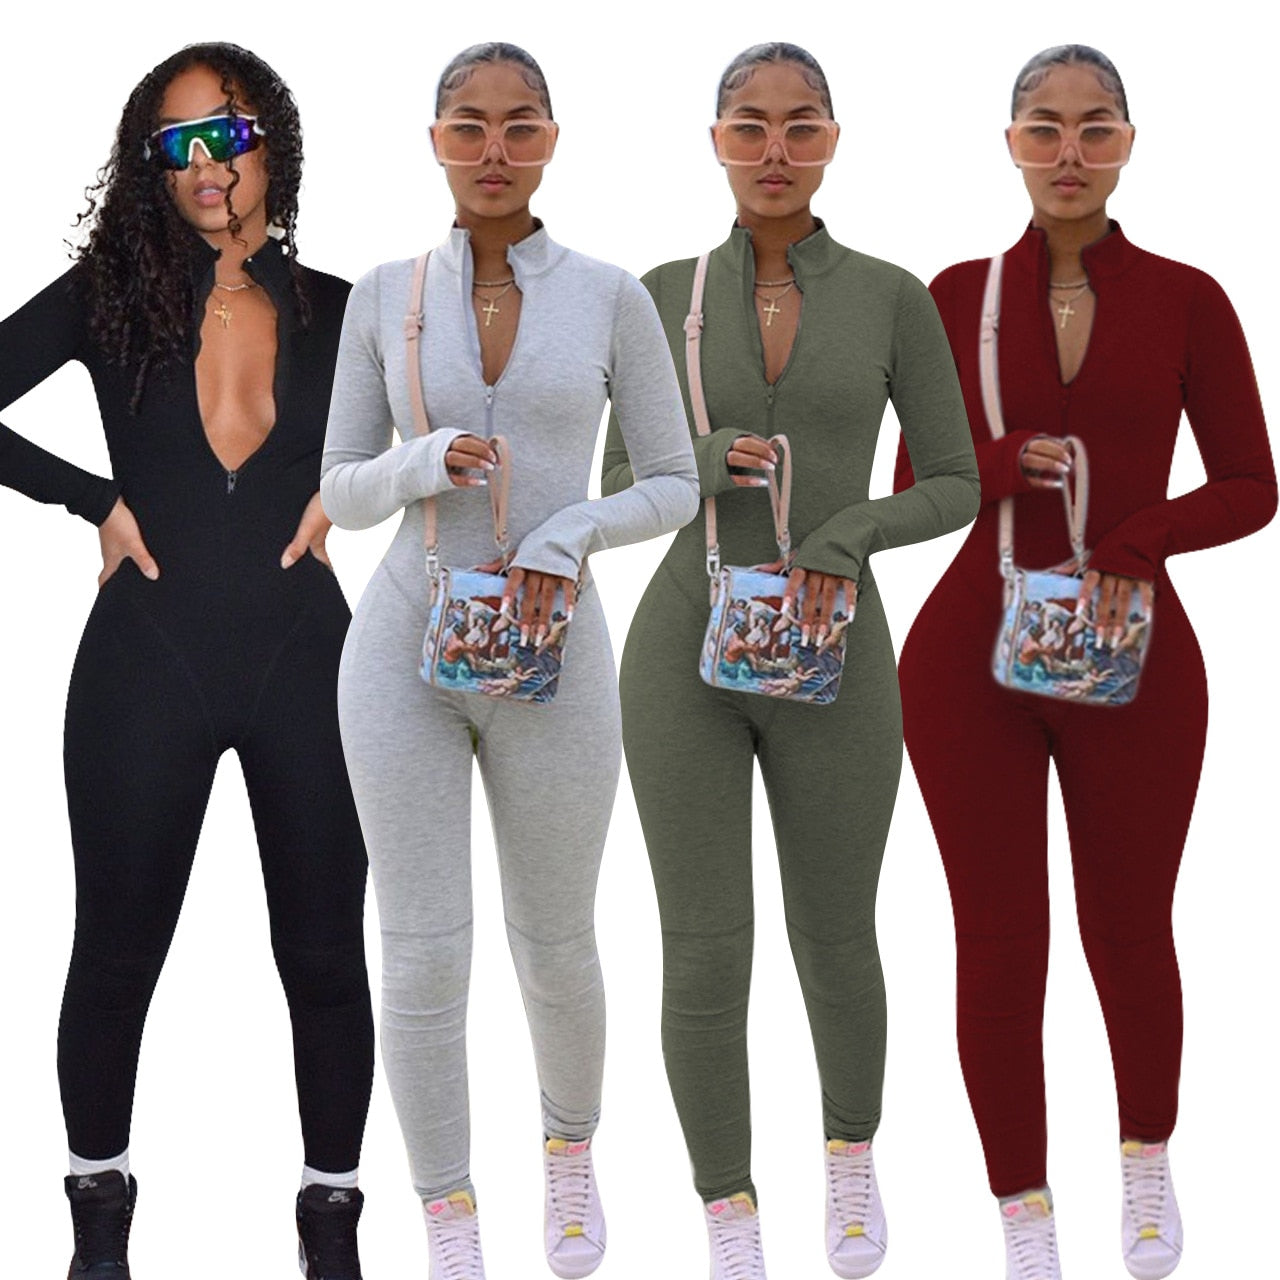 Echoine Zipper Long Sleeve Jumpsuit Green Gray Skinny Bodycon Rompers Autumn Rompers Party Clubwear Outfits Overalls Women - Plushlegacy